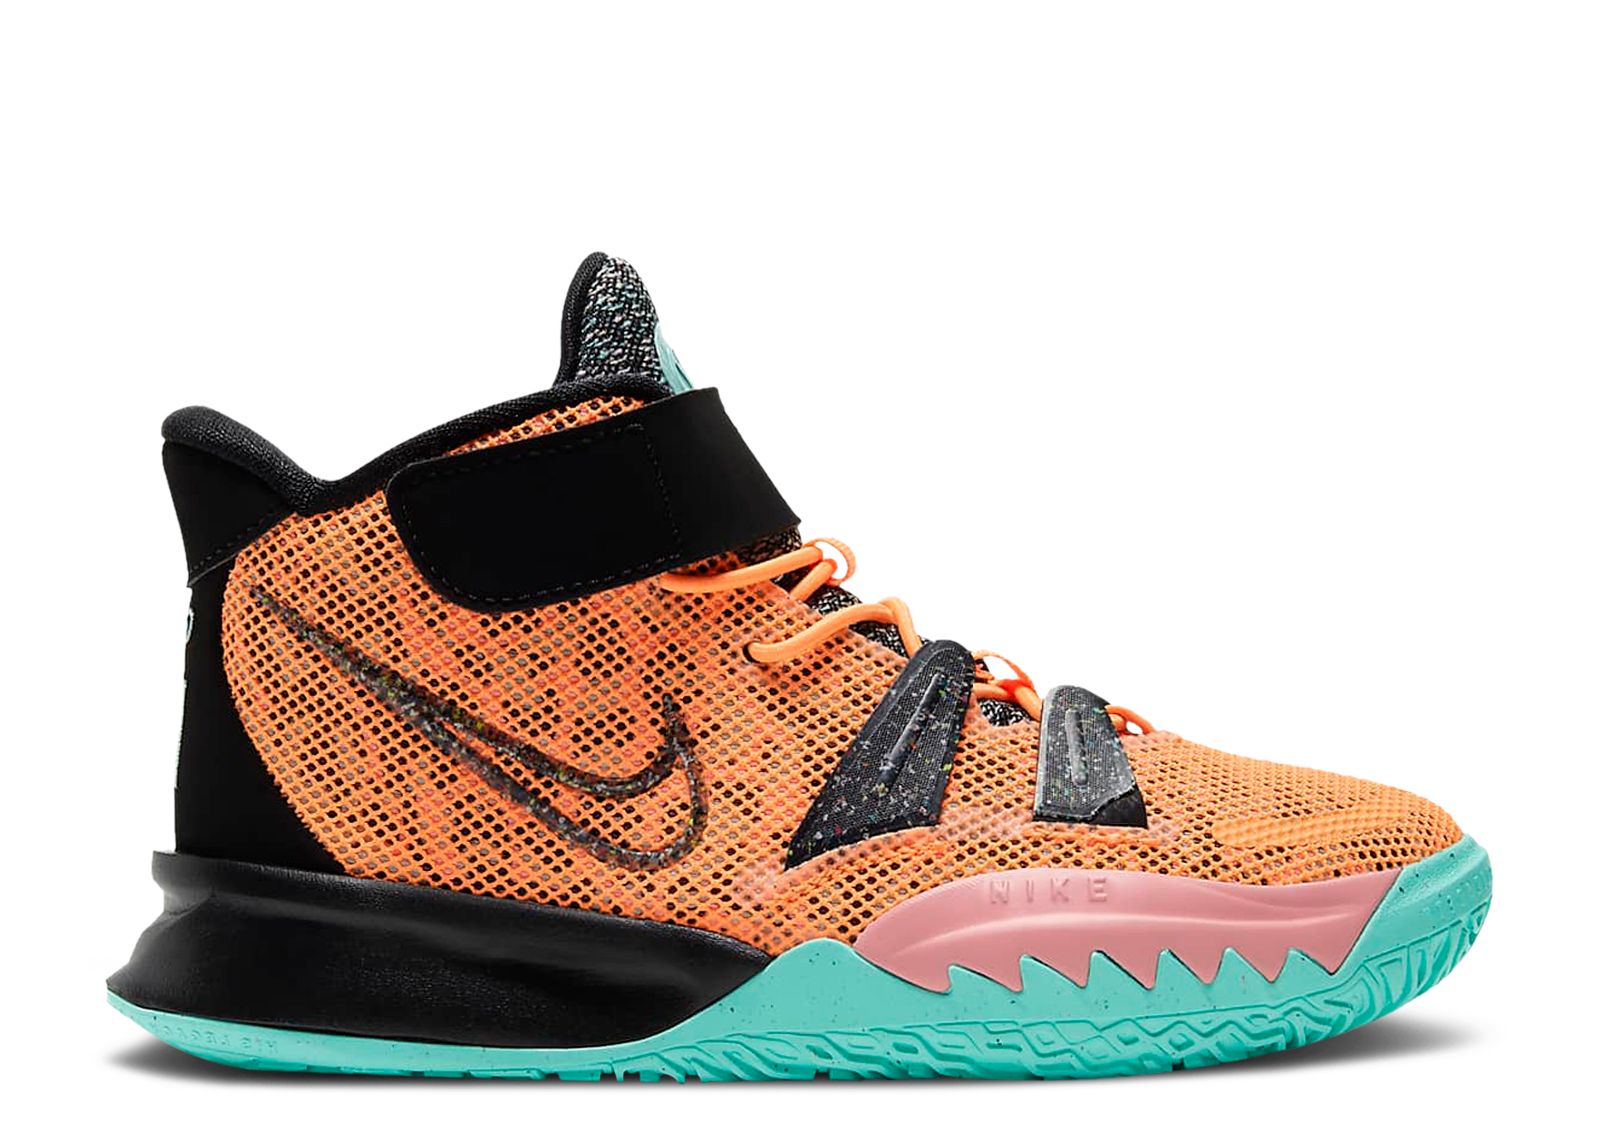 Kyrie 7 PS 'Play For The Future' - Nike - CW3236 800 - atomic